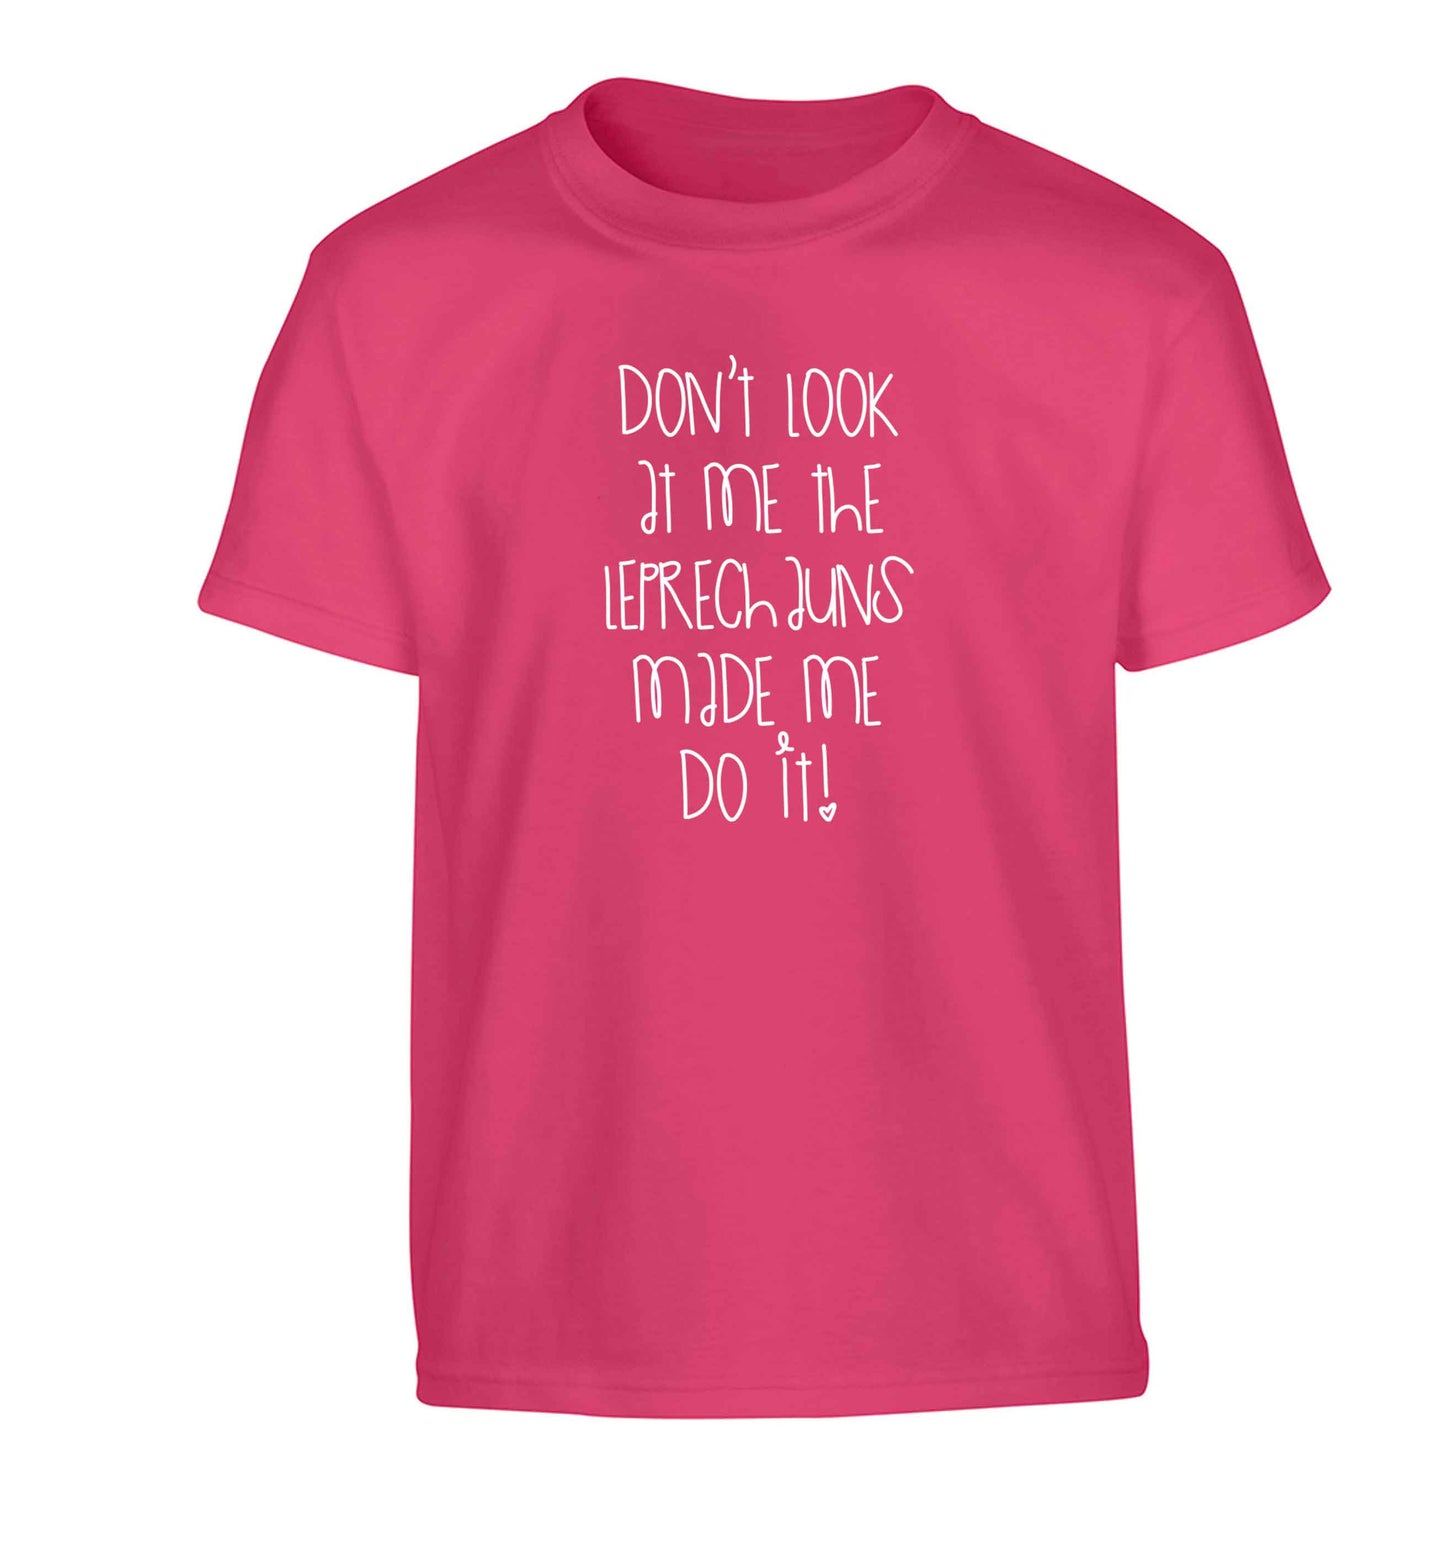 Don't look at me the leprechauns made me do it Children's pink Tshirt 12-13 Years